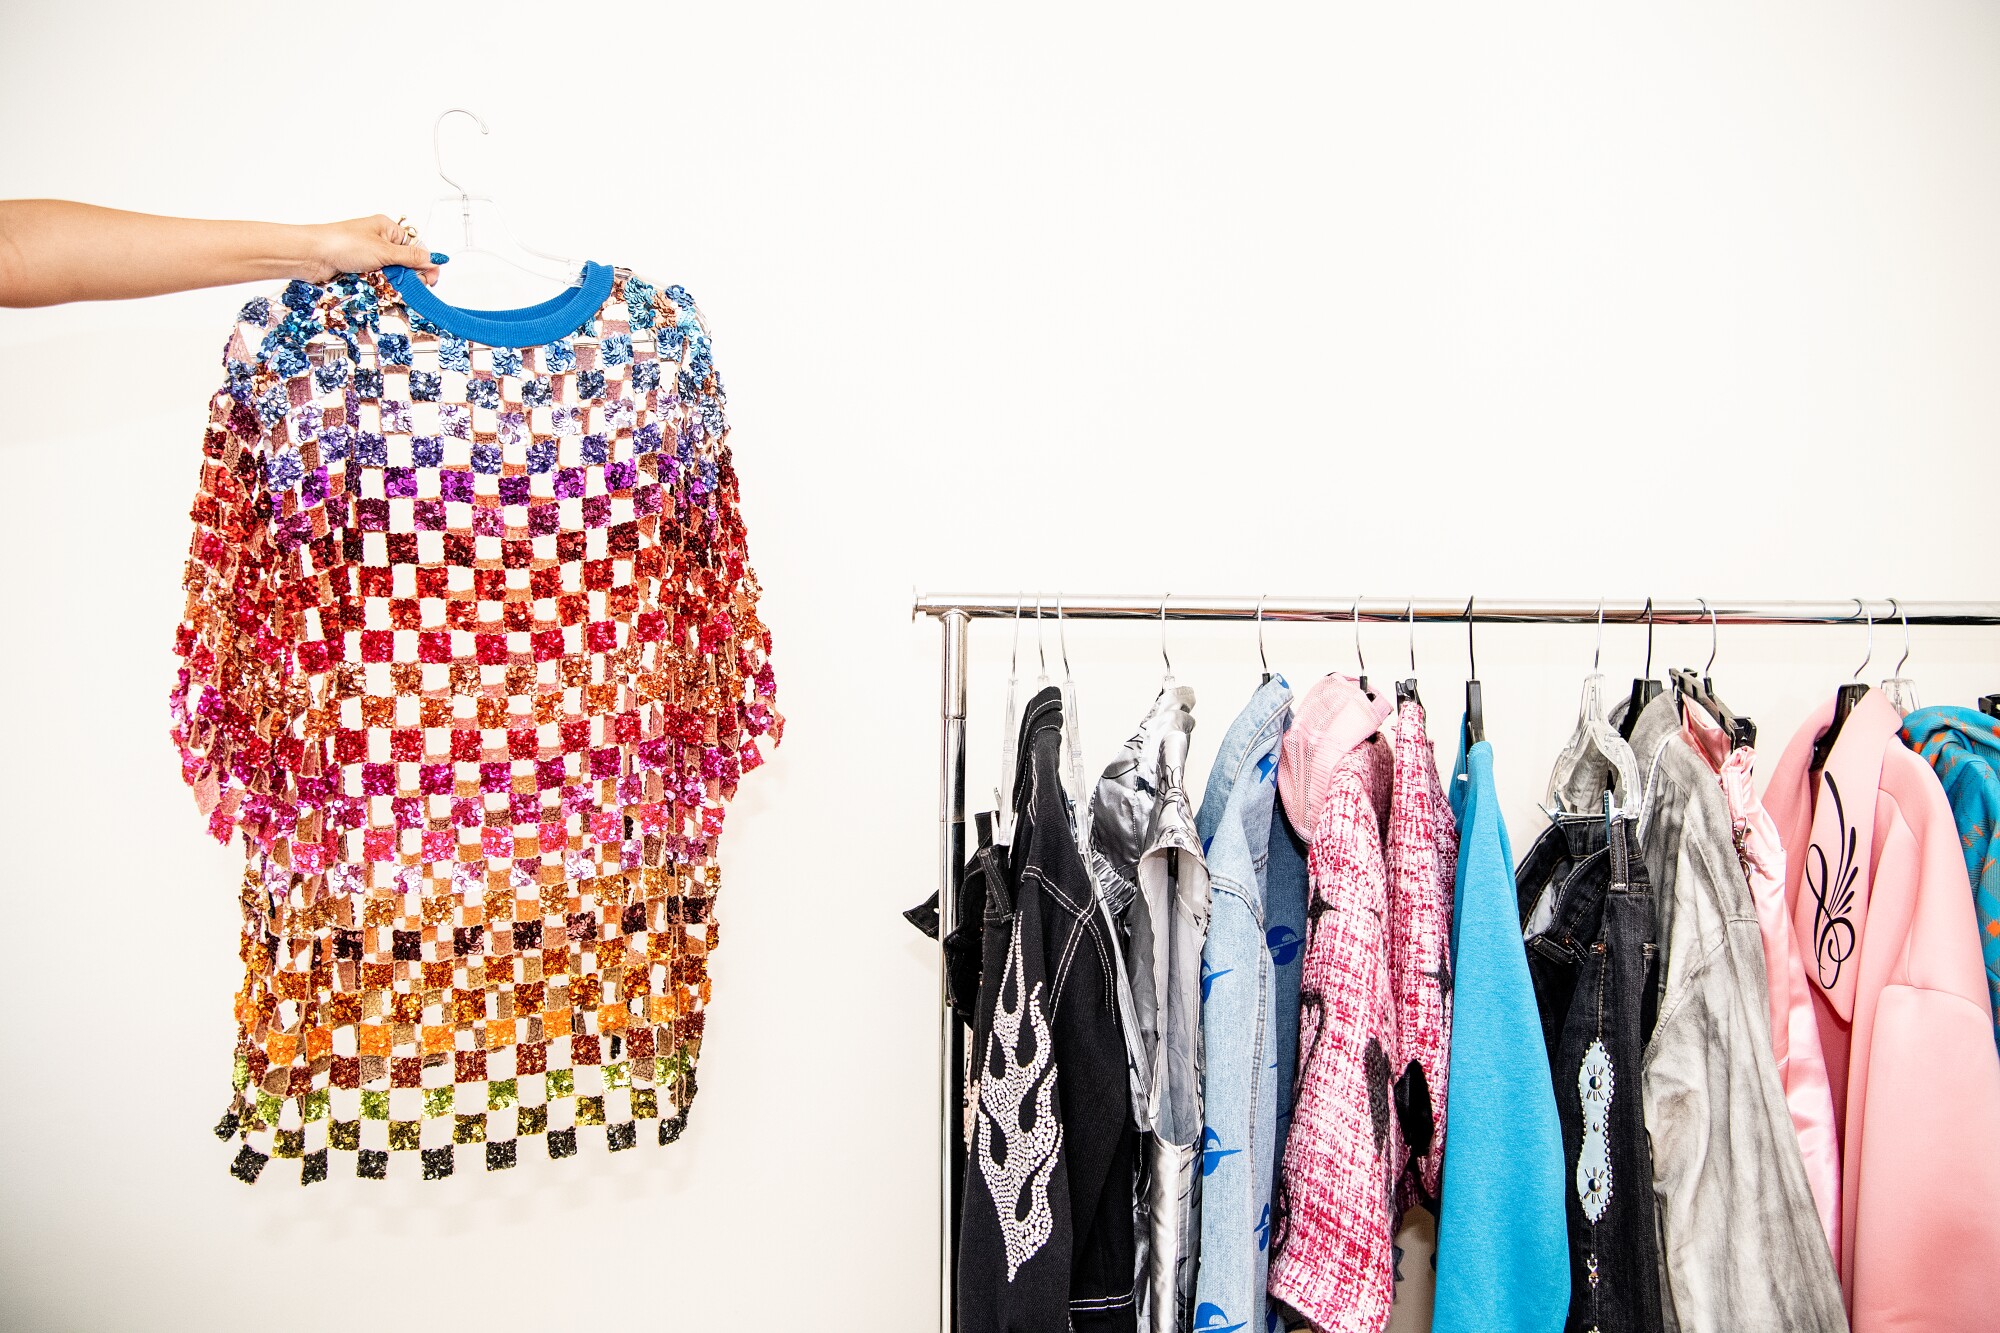 Stylist Keyla Marquez holds a colorful sequined shirt next to a clothes rack